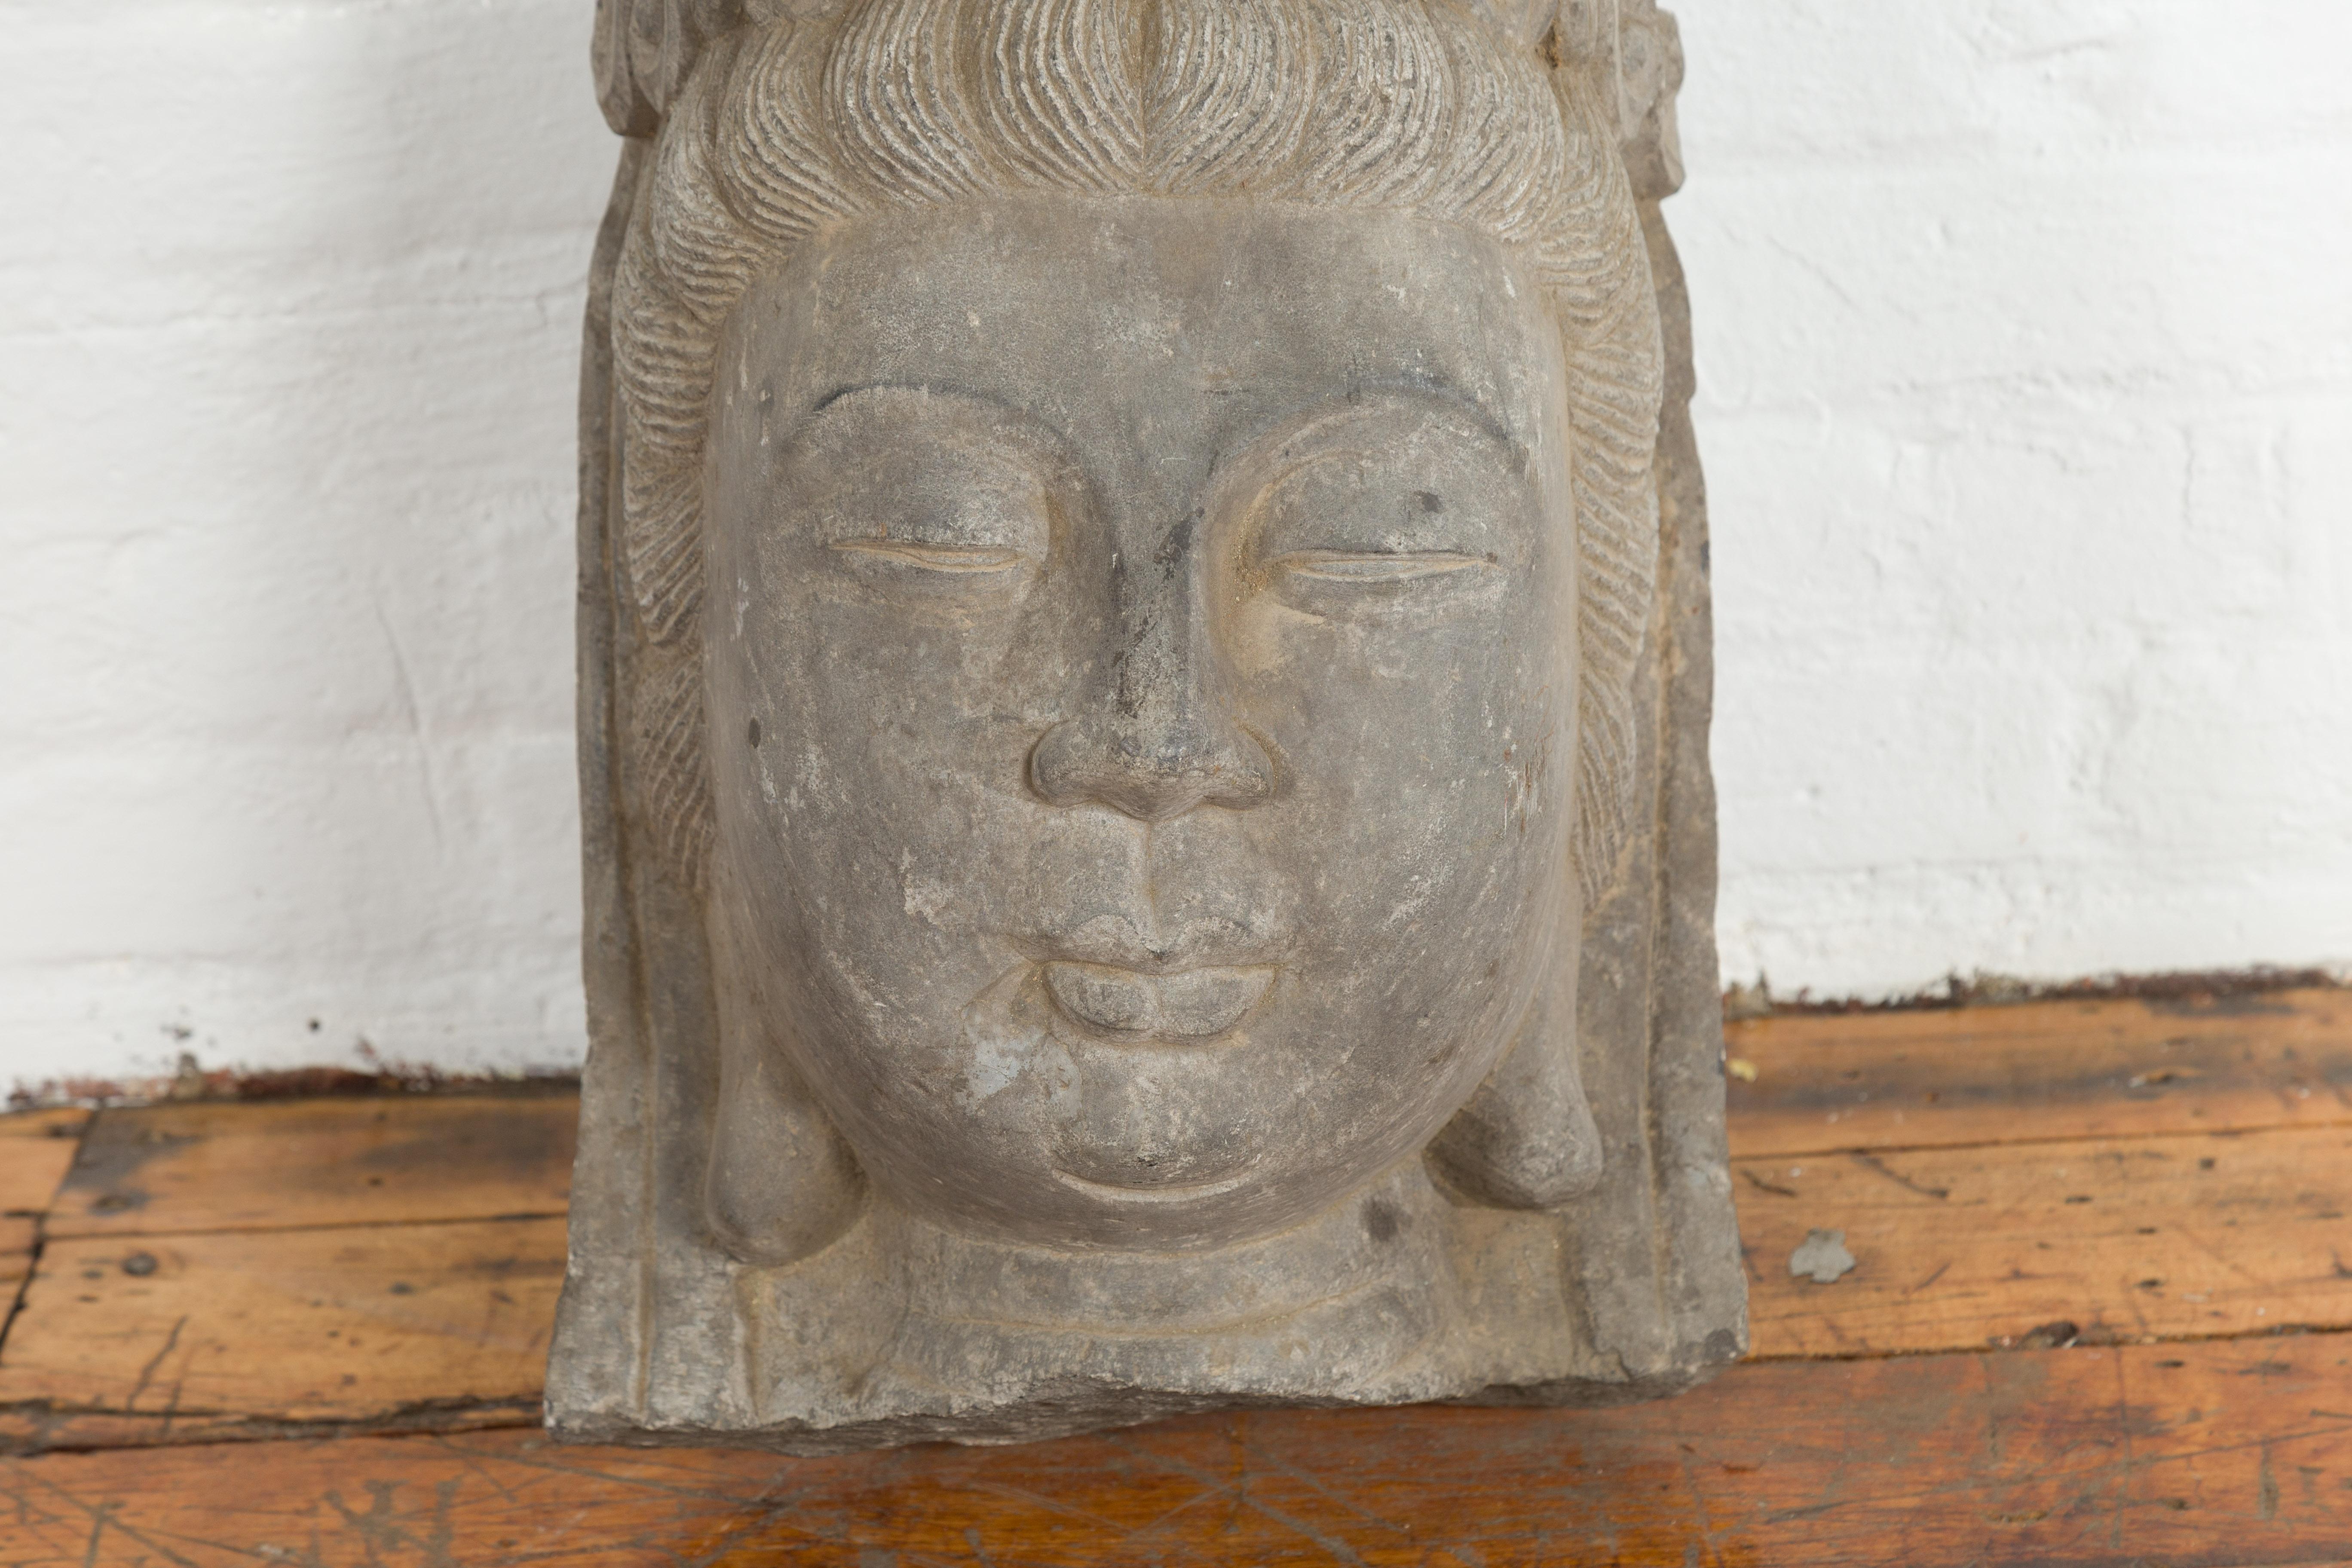 Chinese Vintage Carved Stone Bust of Guanyin, Bodhisattva of Compassion In Good Condition For Sale In Yonkers, NY